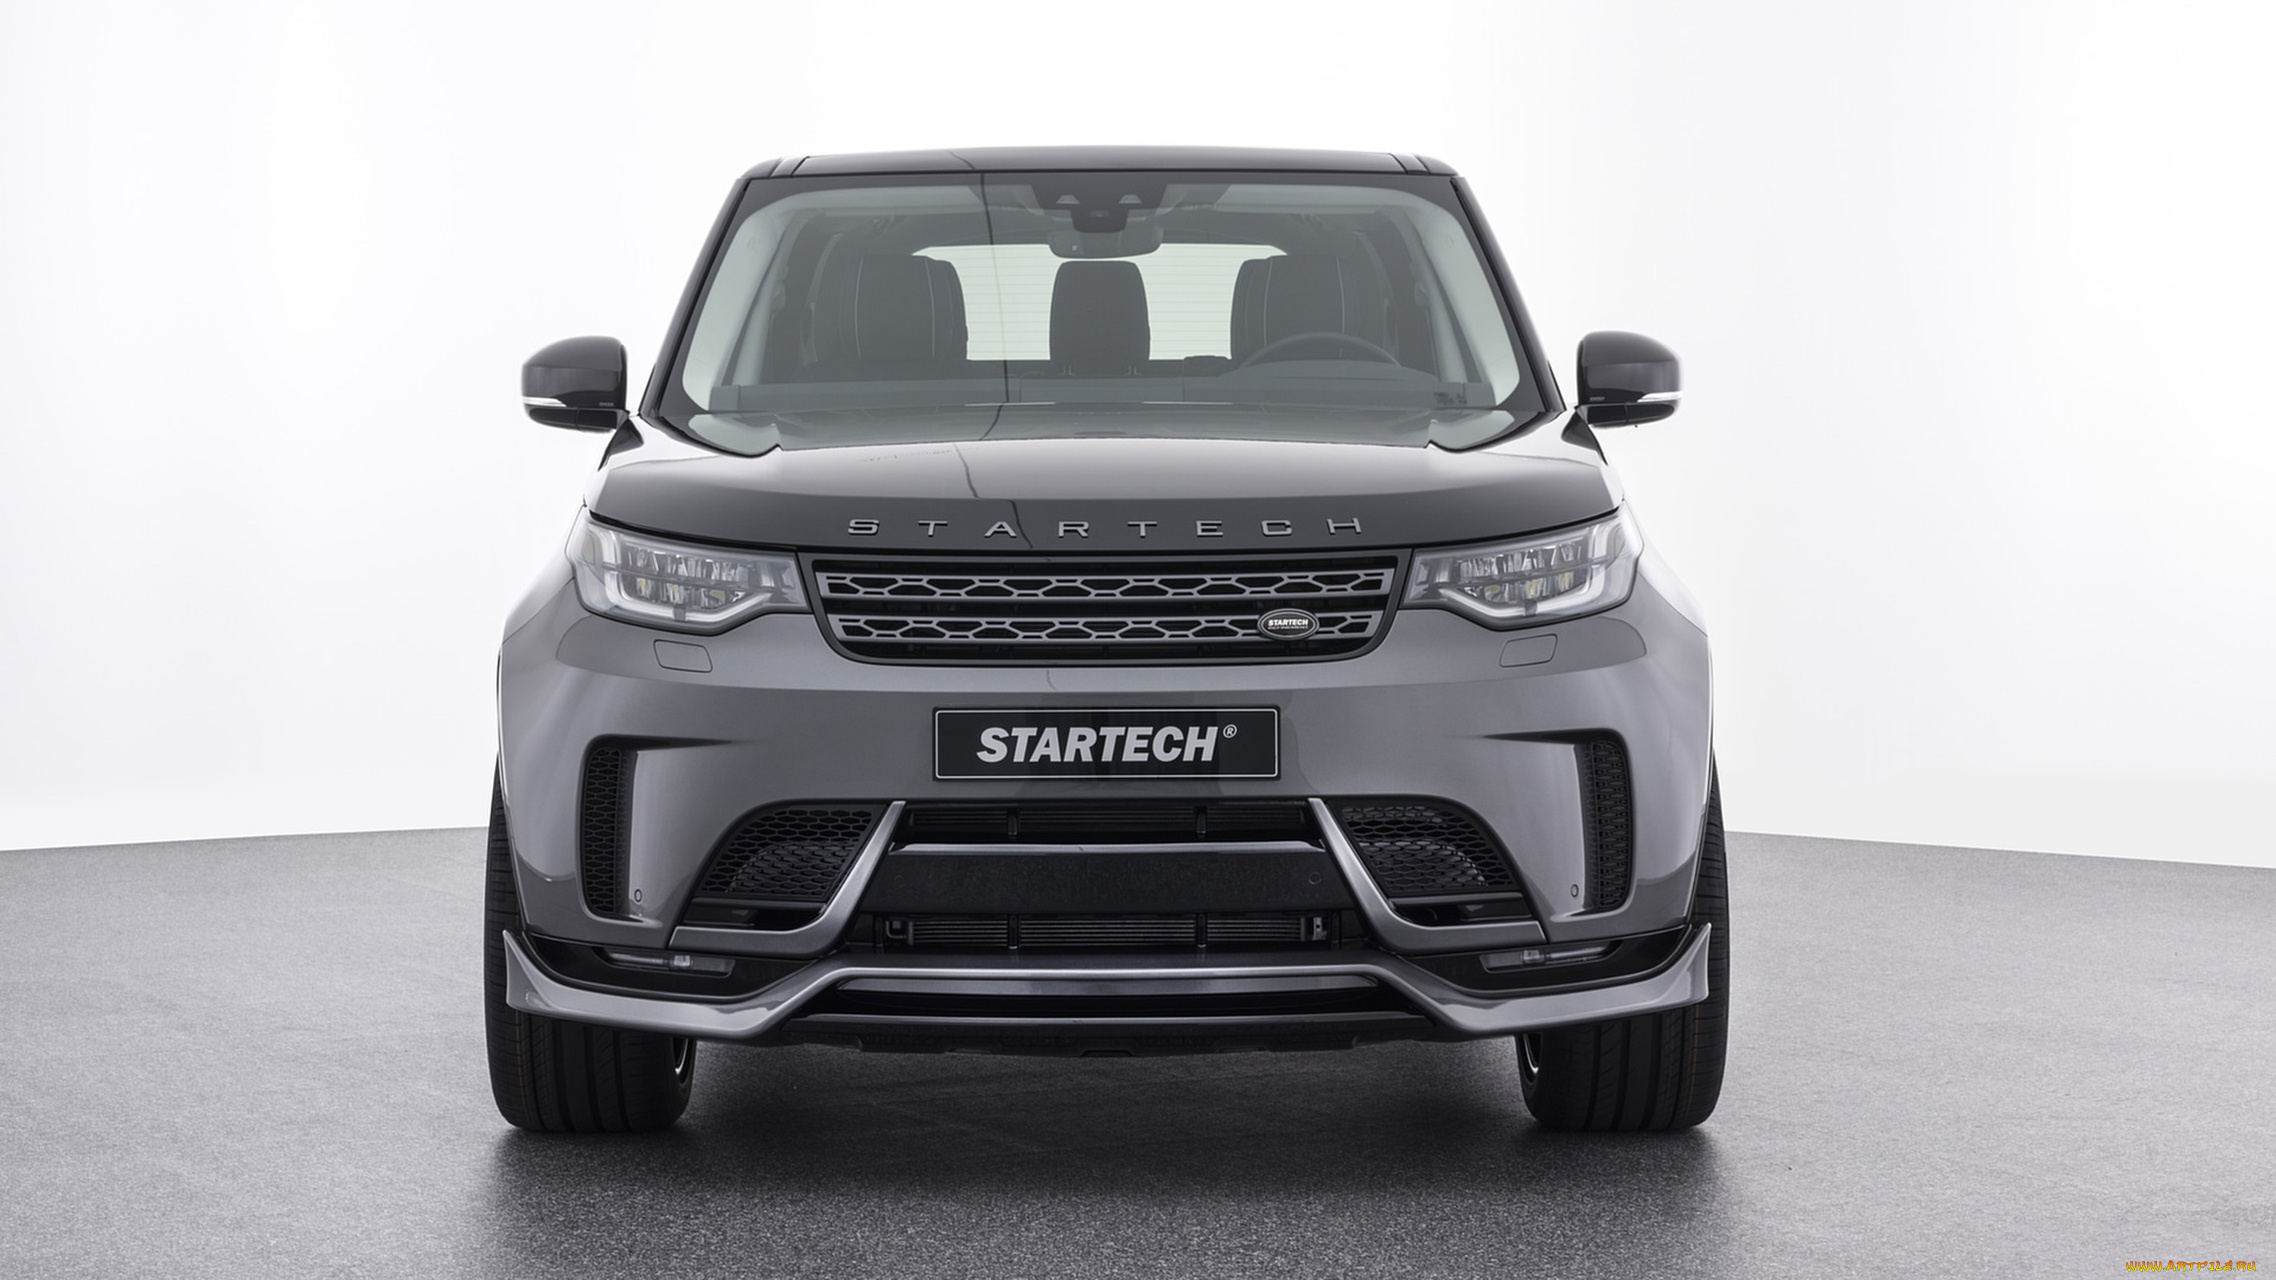 startech, land-rover, discovery-5, 2017, автомобили, land-rover, 2017, startech, discovery-5